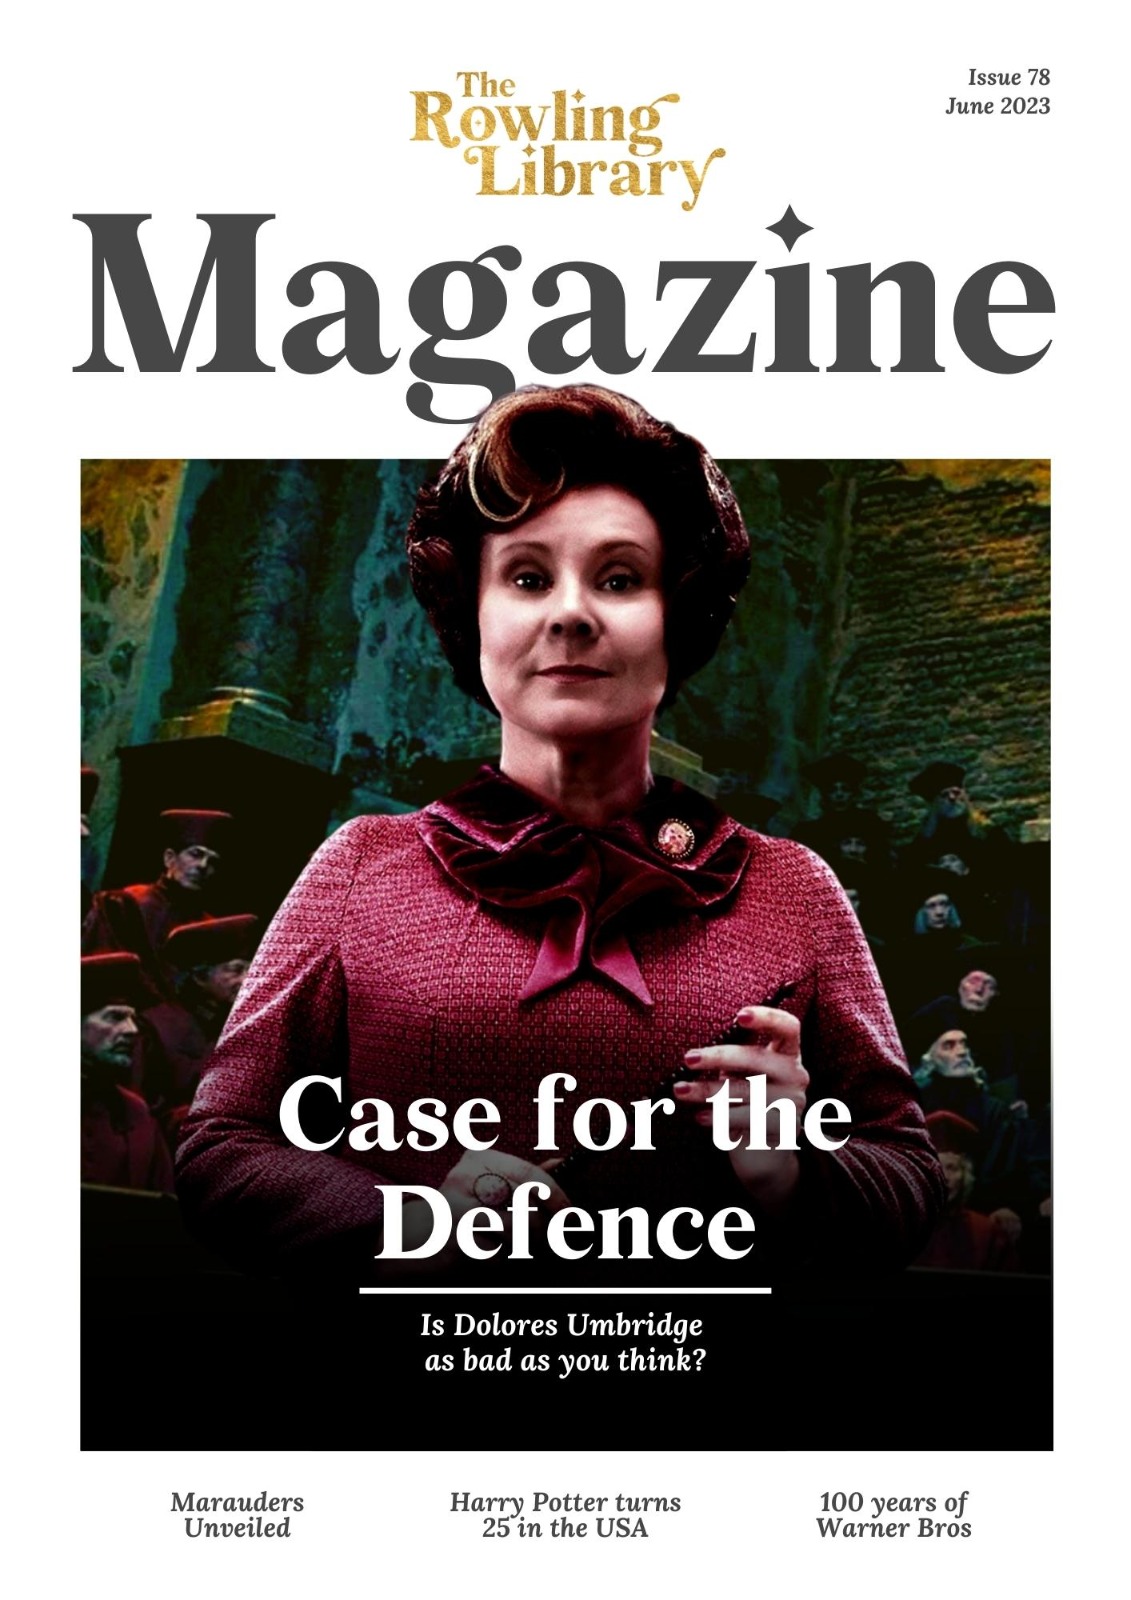 The Rowling Library Magazine #78 (June 2023): Case for the Defence